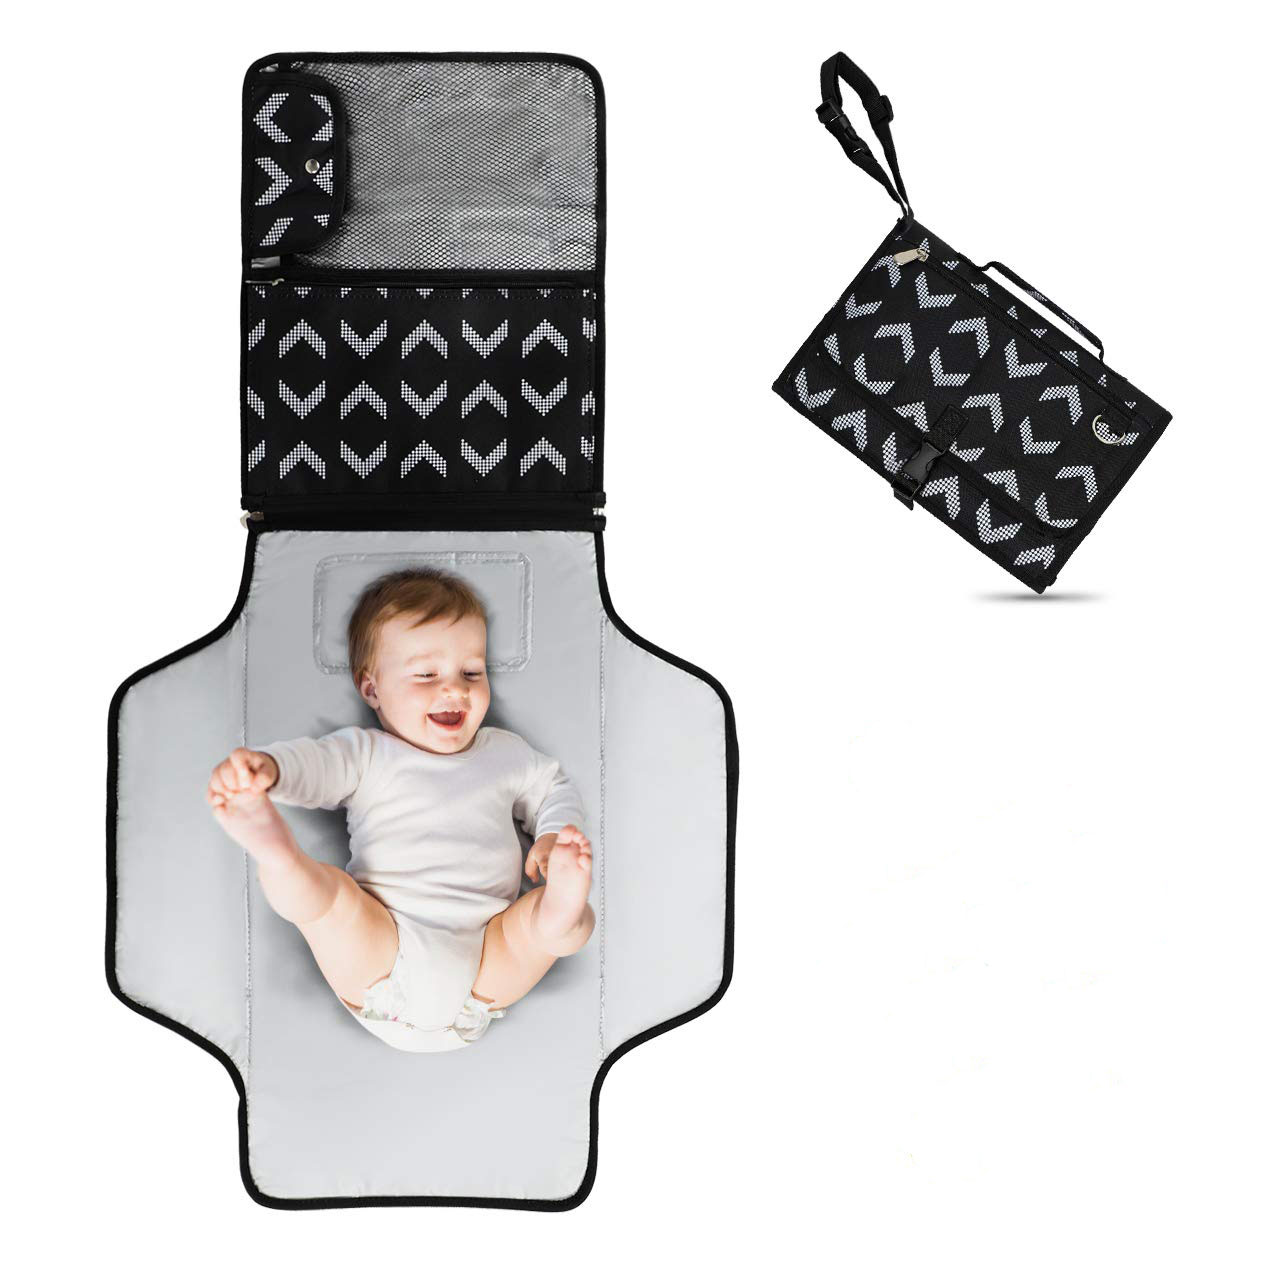 Baby Travel Change Mat Soft Infant Changing Table Pad with Magnetic Clip Clutch Design